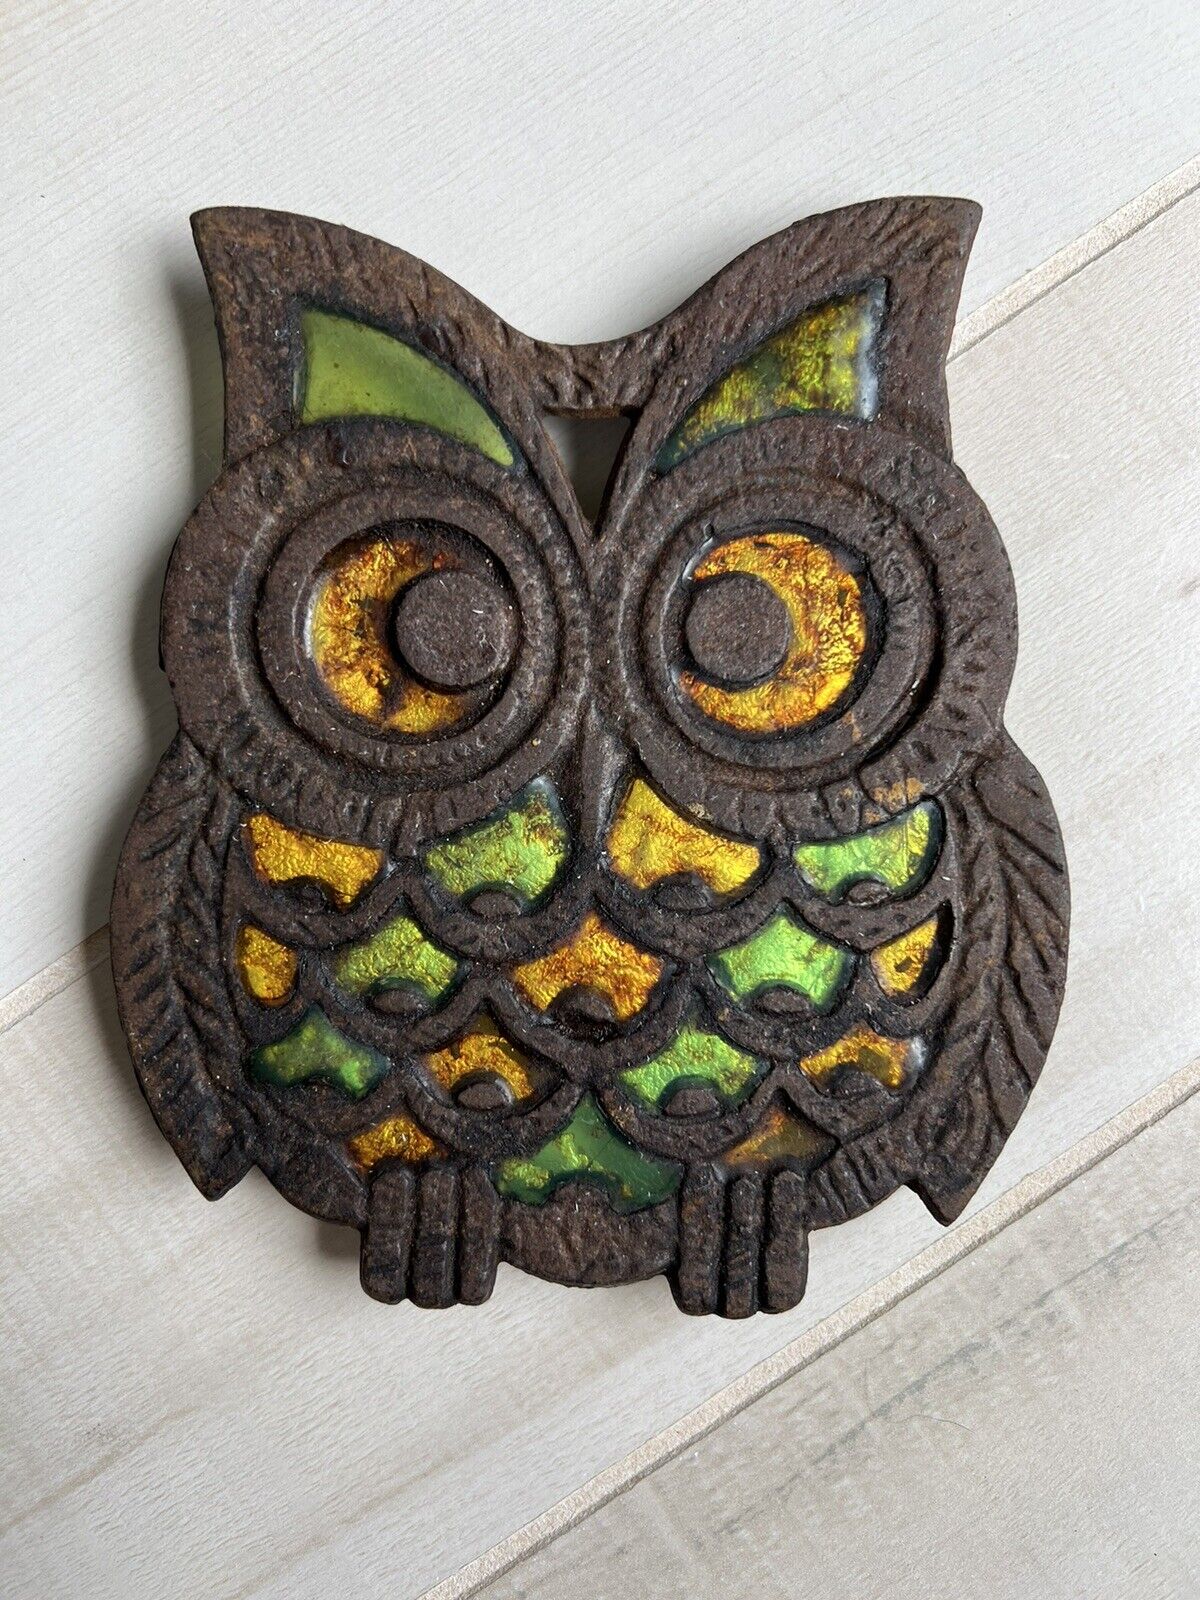 Vintage Retro Cast Iron Owl Footed Trivet green Stained Glass Gold